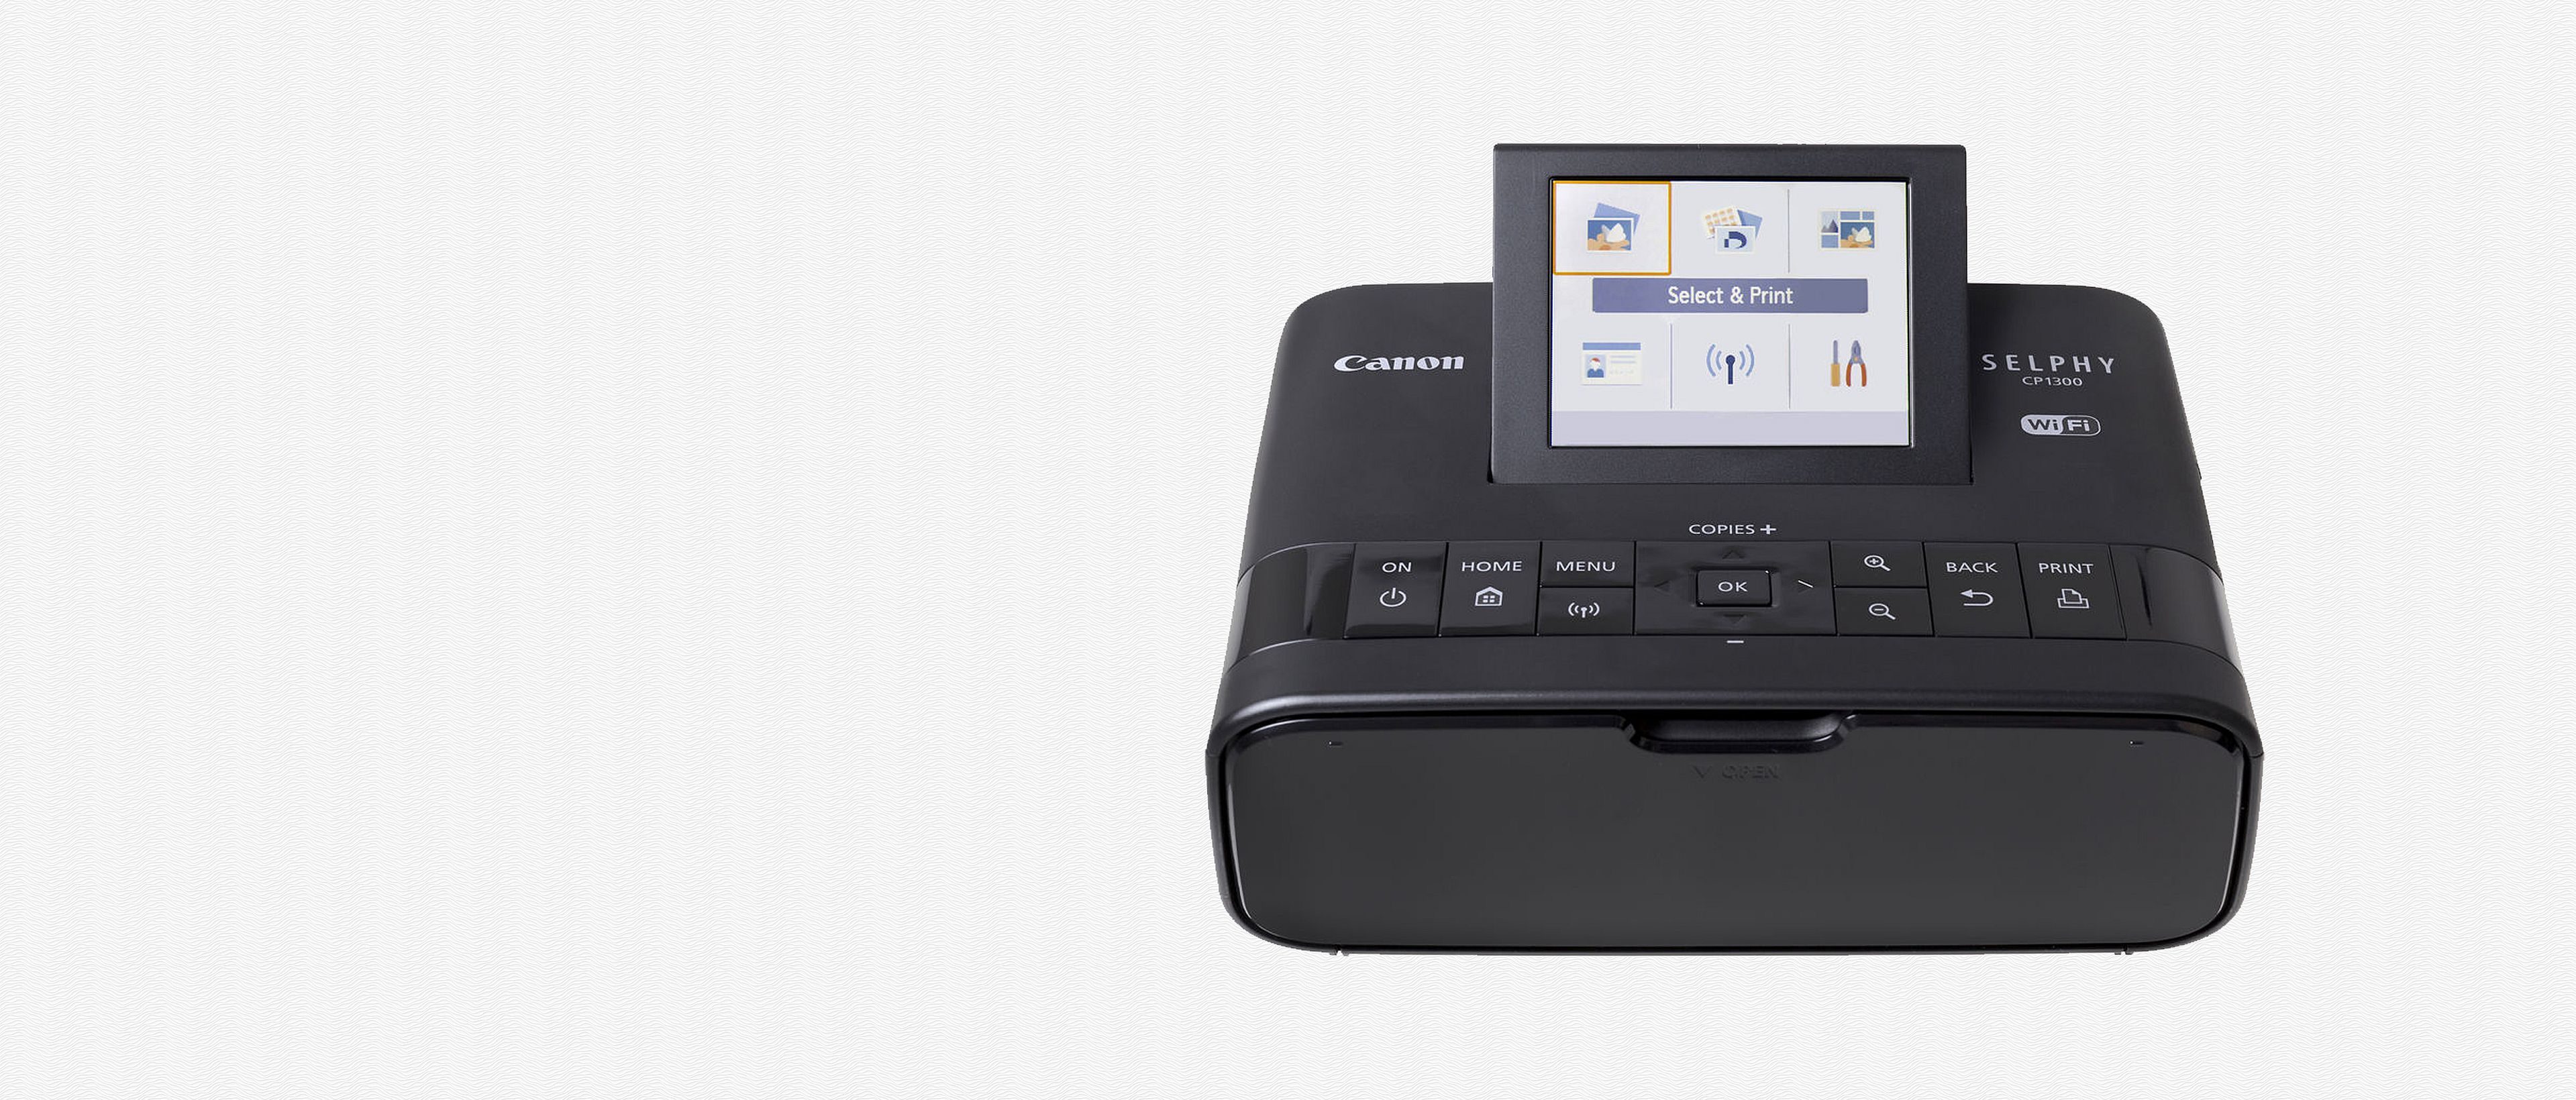 Preview Image: Canon Selphy CP1300 der mobile Fotodrucker